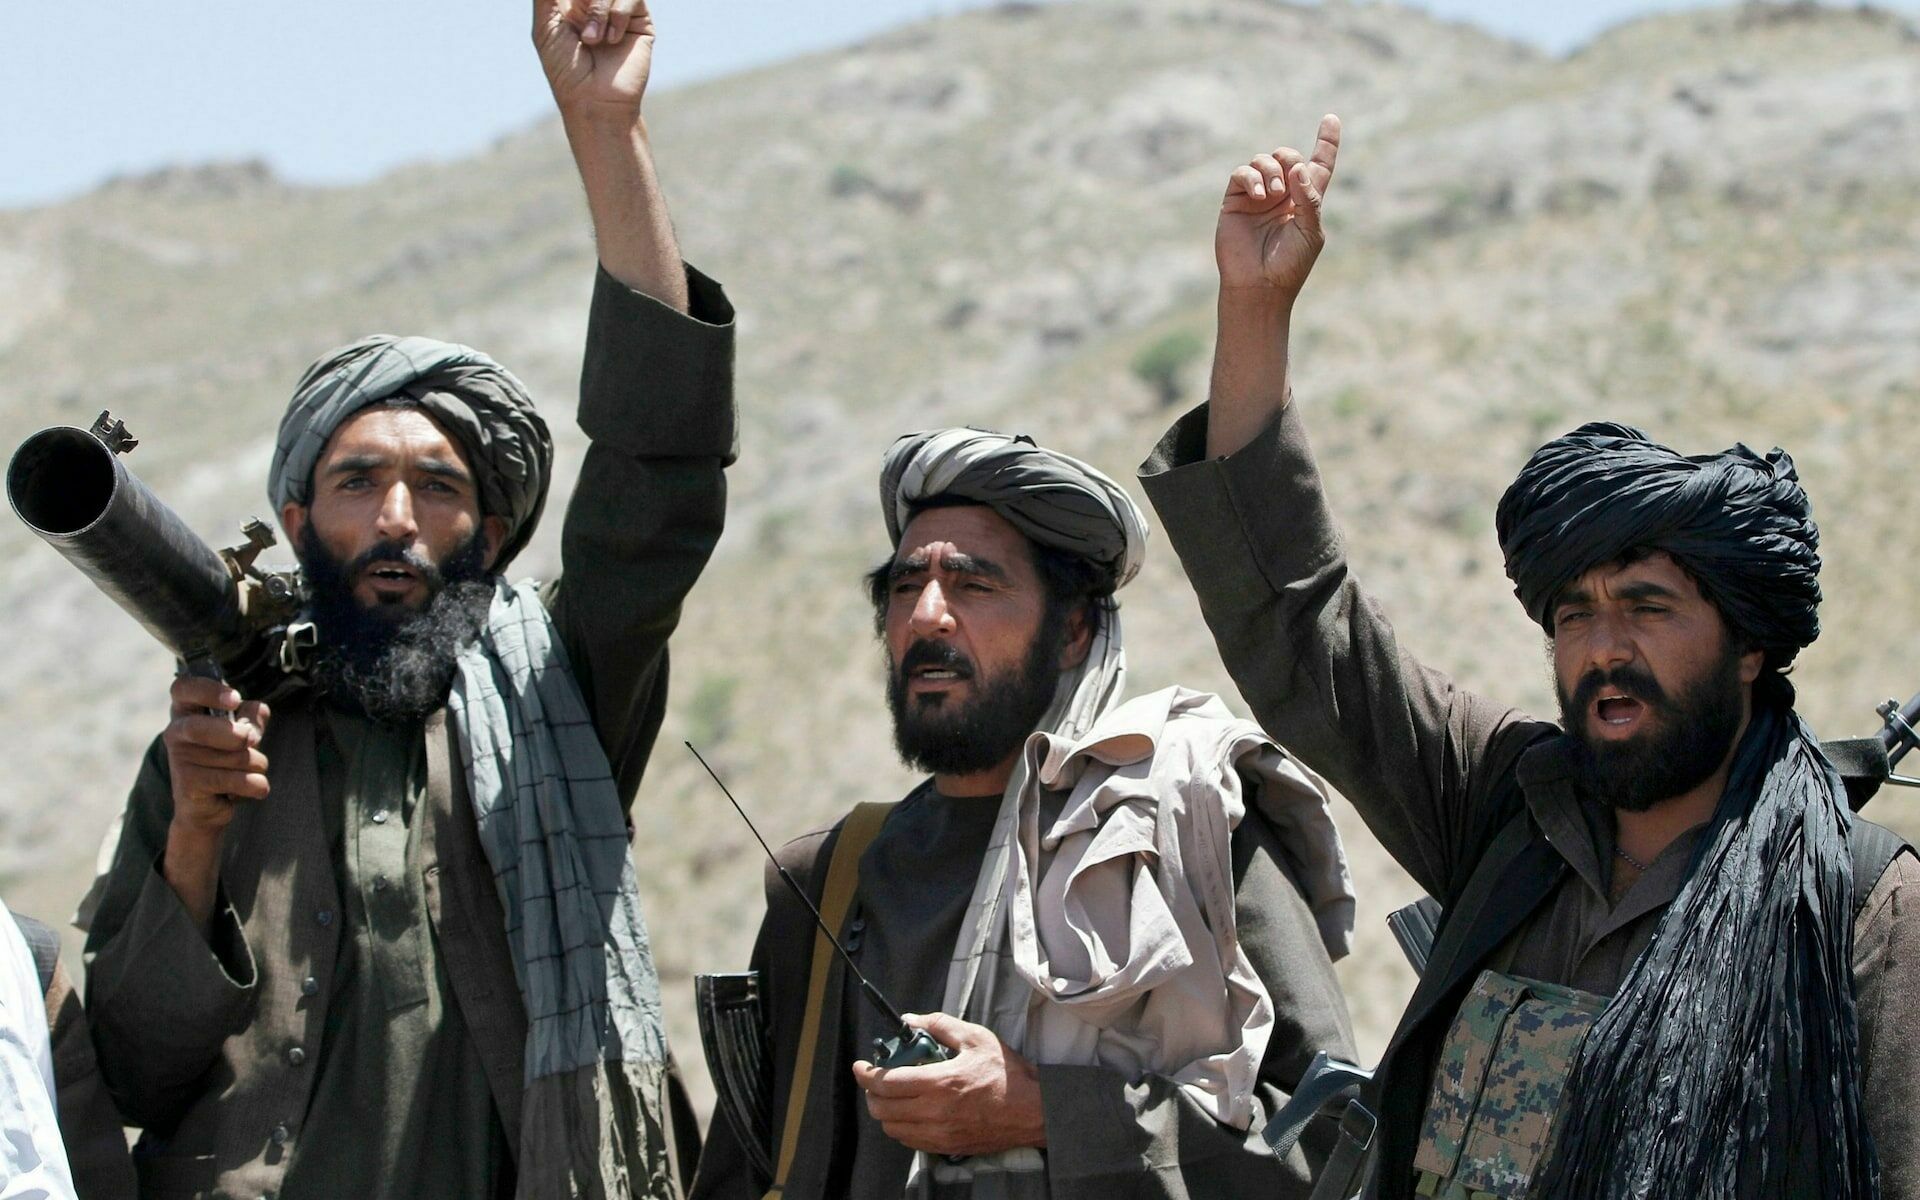 The Taliban* called on Moscow and Kiev for peace